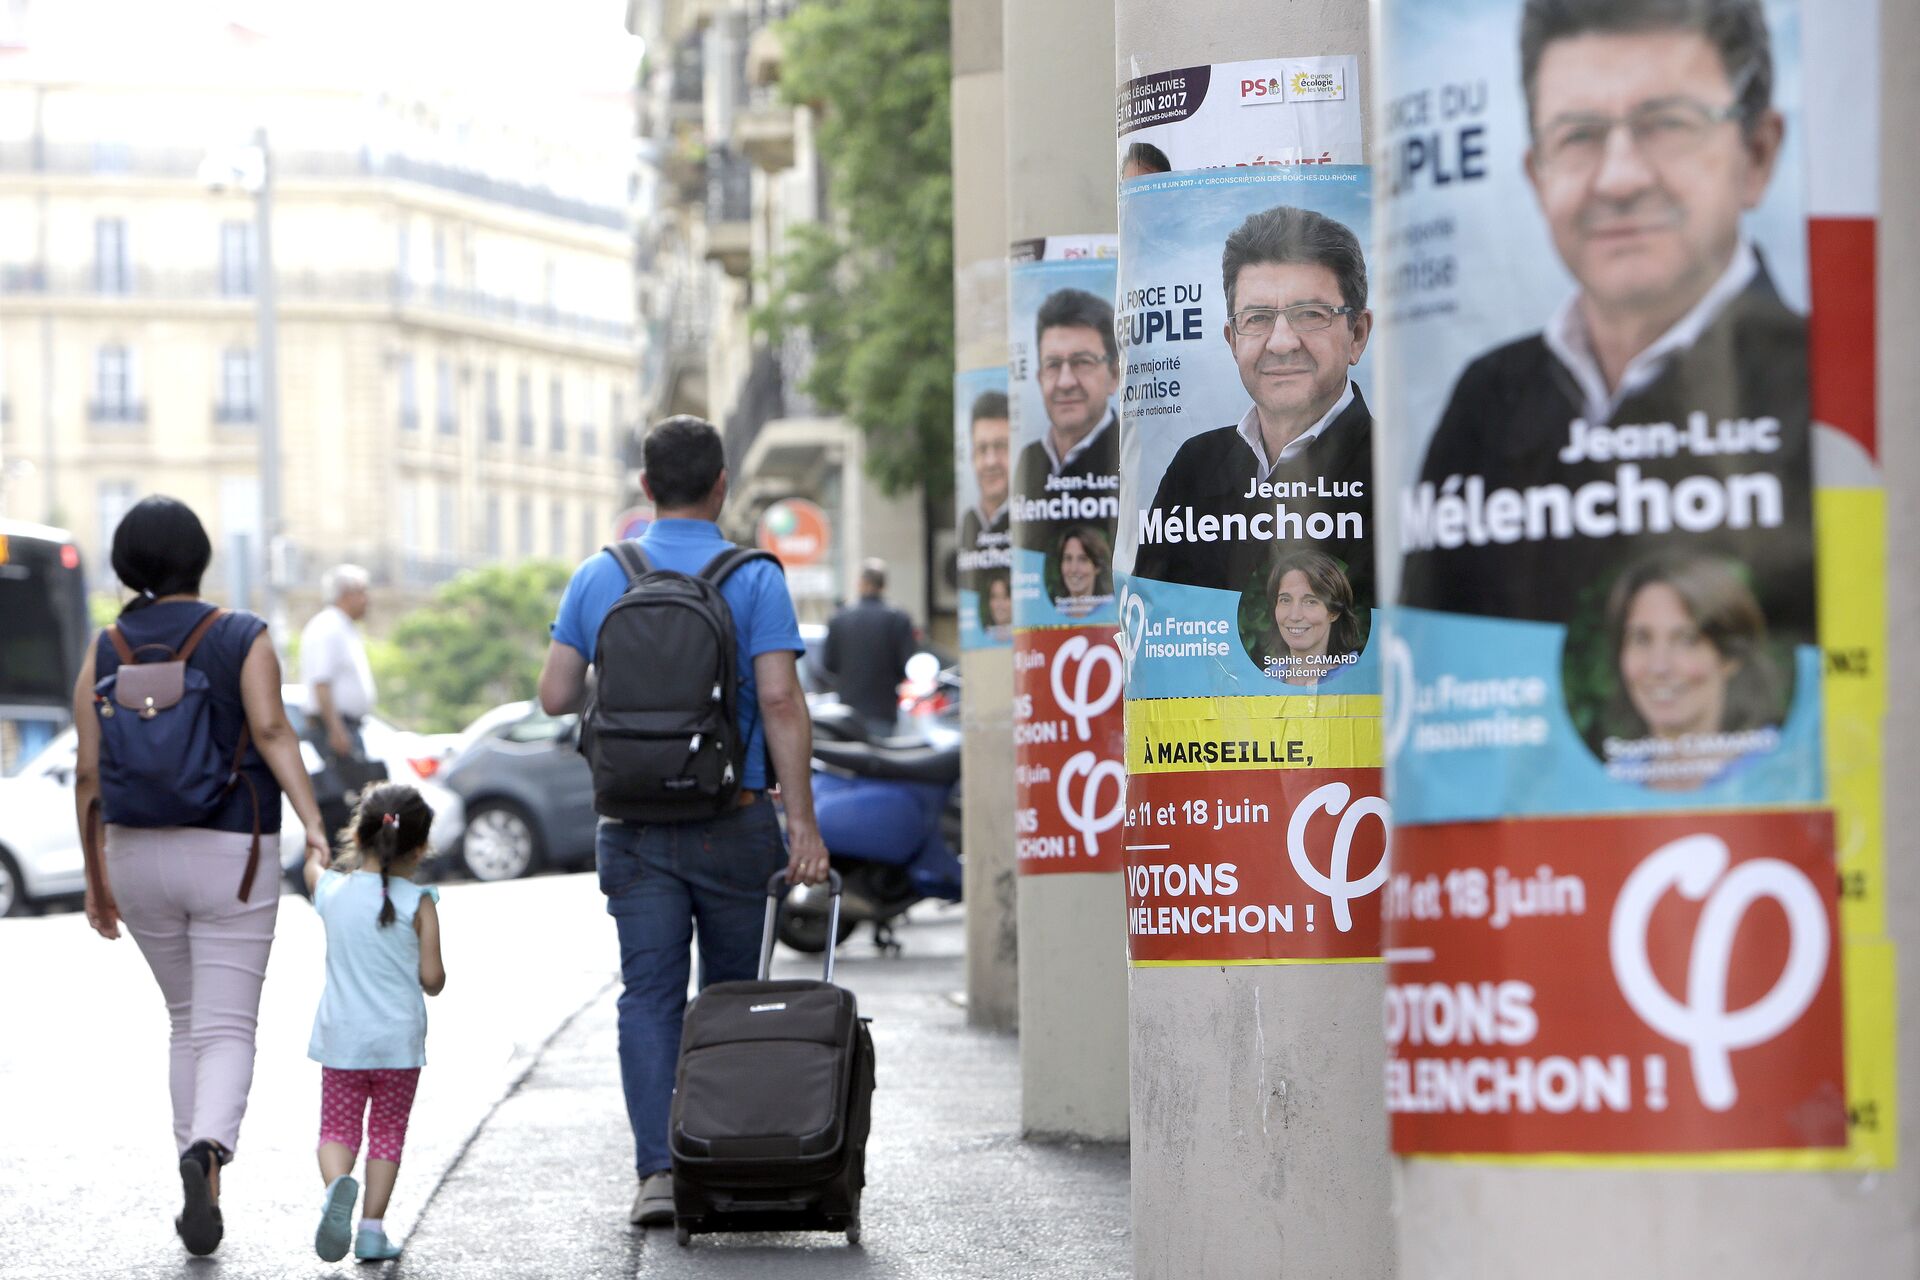 People walk past near posters of Jean-Luc Melenchon, a former hard-left candidate in the first round of the presidential election, candidate for the upcoming legislative elections, at the Belsunce district, in Marseille, southern France - Sputnik International, 1920, 19.04.2022